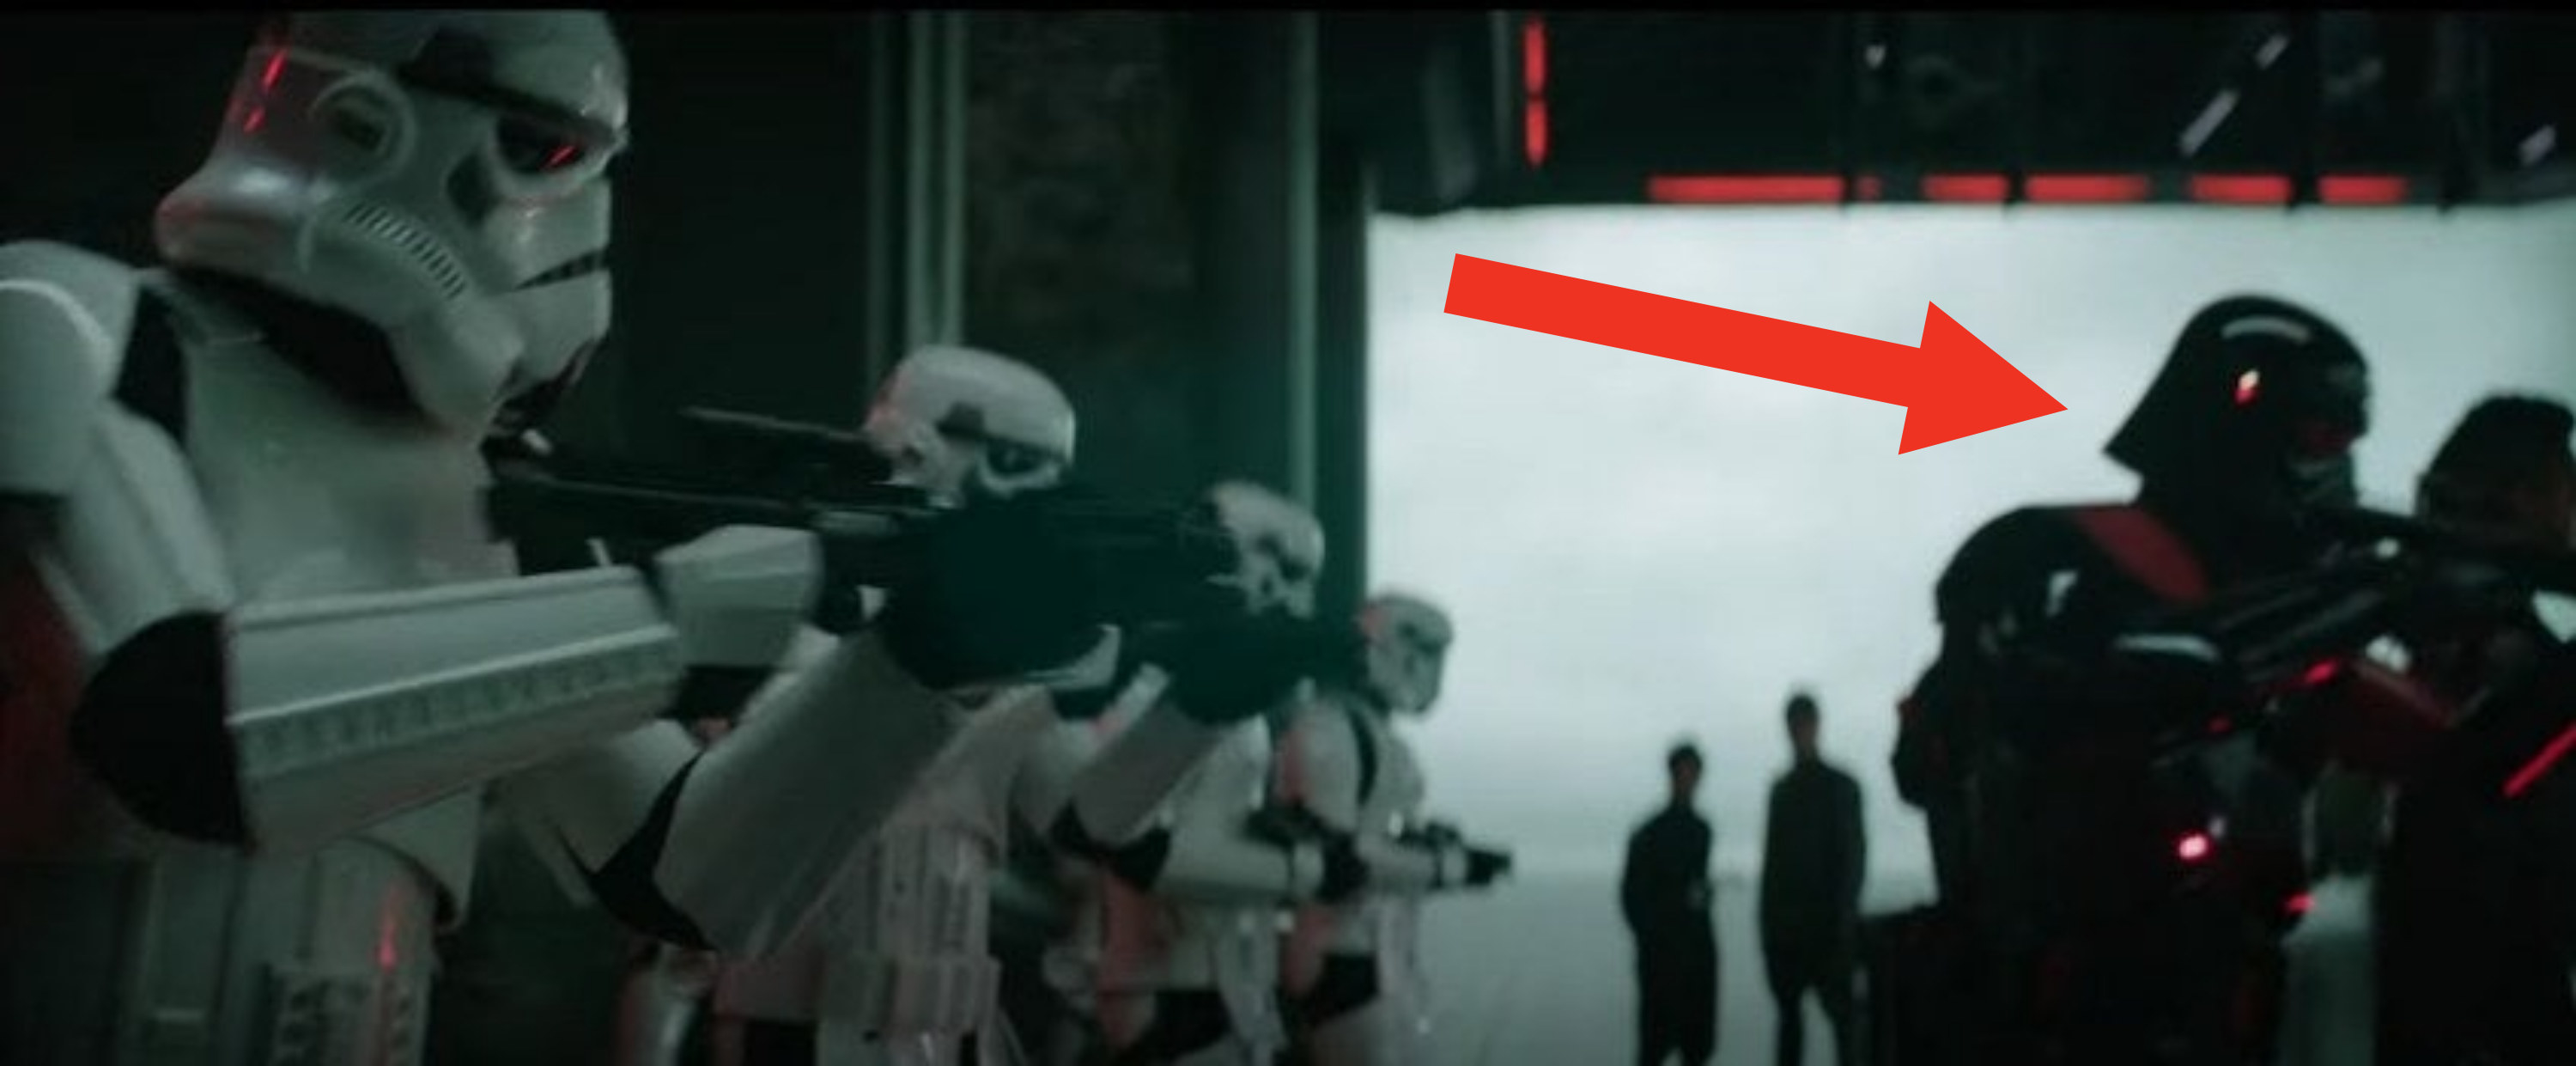 A black and red stormtrooper takes aim